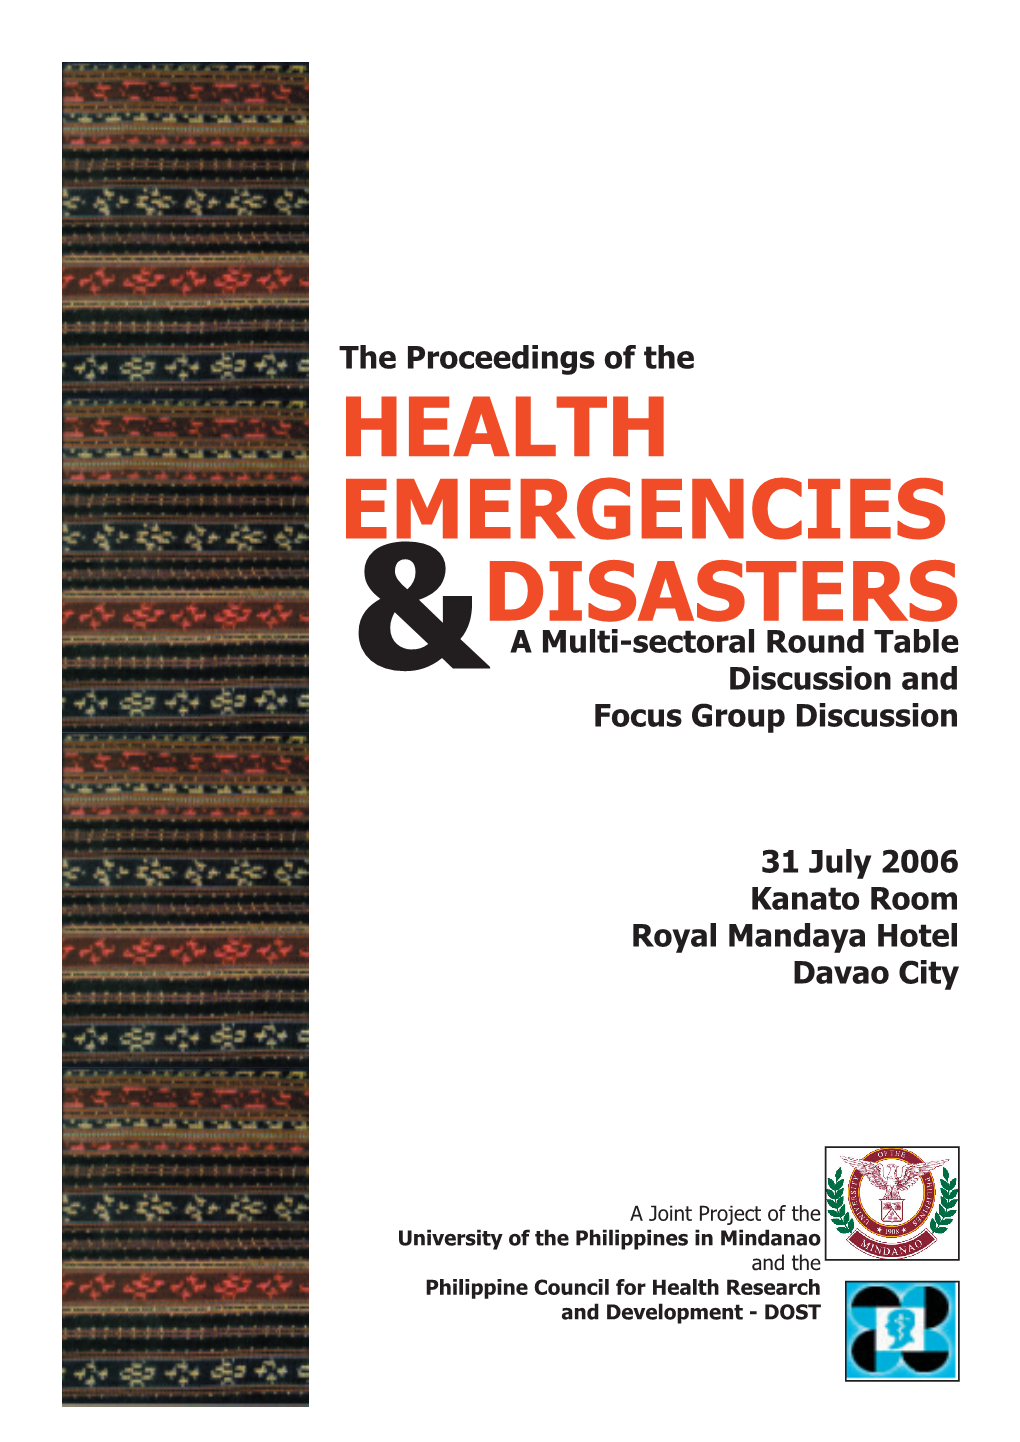 HEALTH EMERGENCIES DISASTERS a Multi-Sectoral Round Table & Discussion and Focus Group Discussion